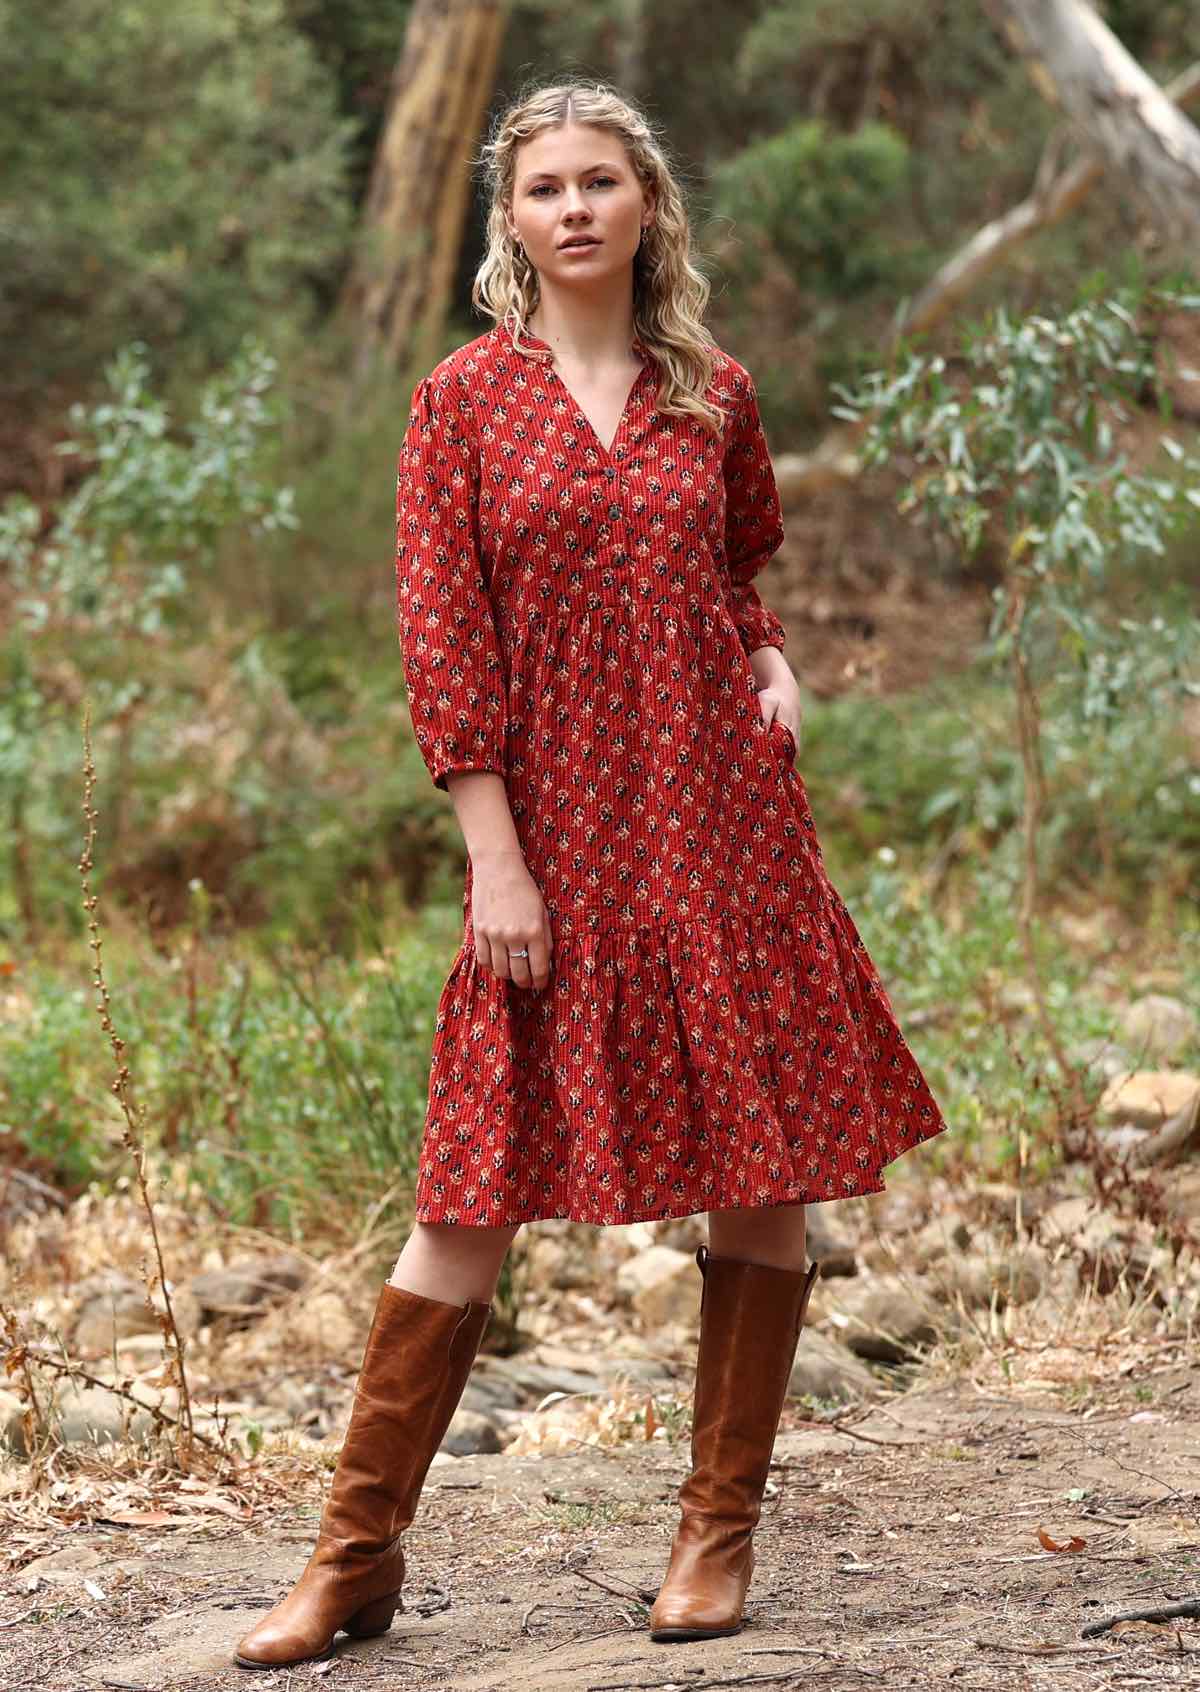 Boho cotton dress looks great loose or belted